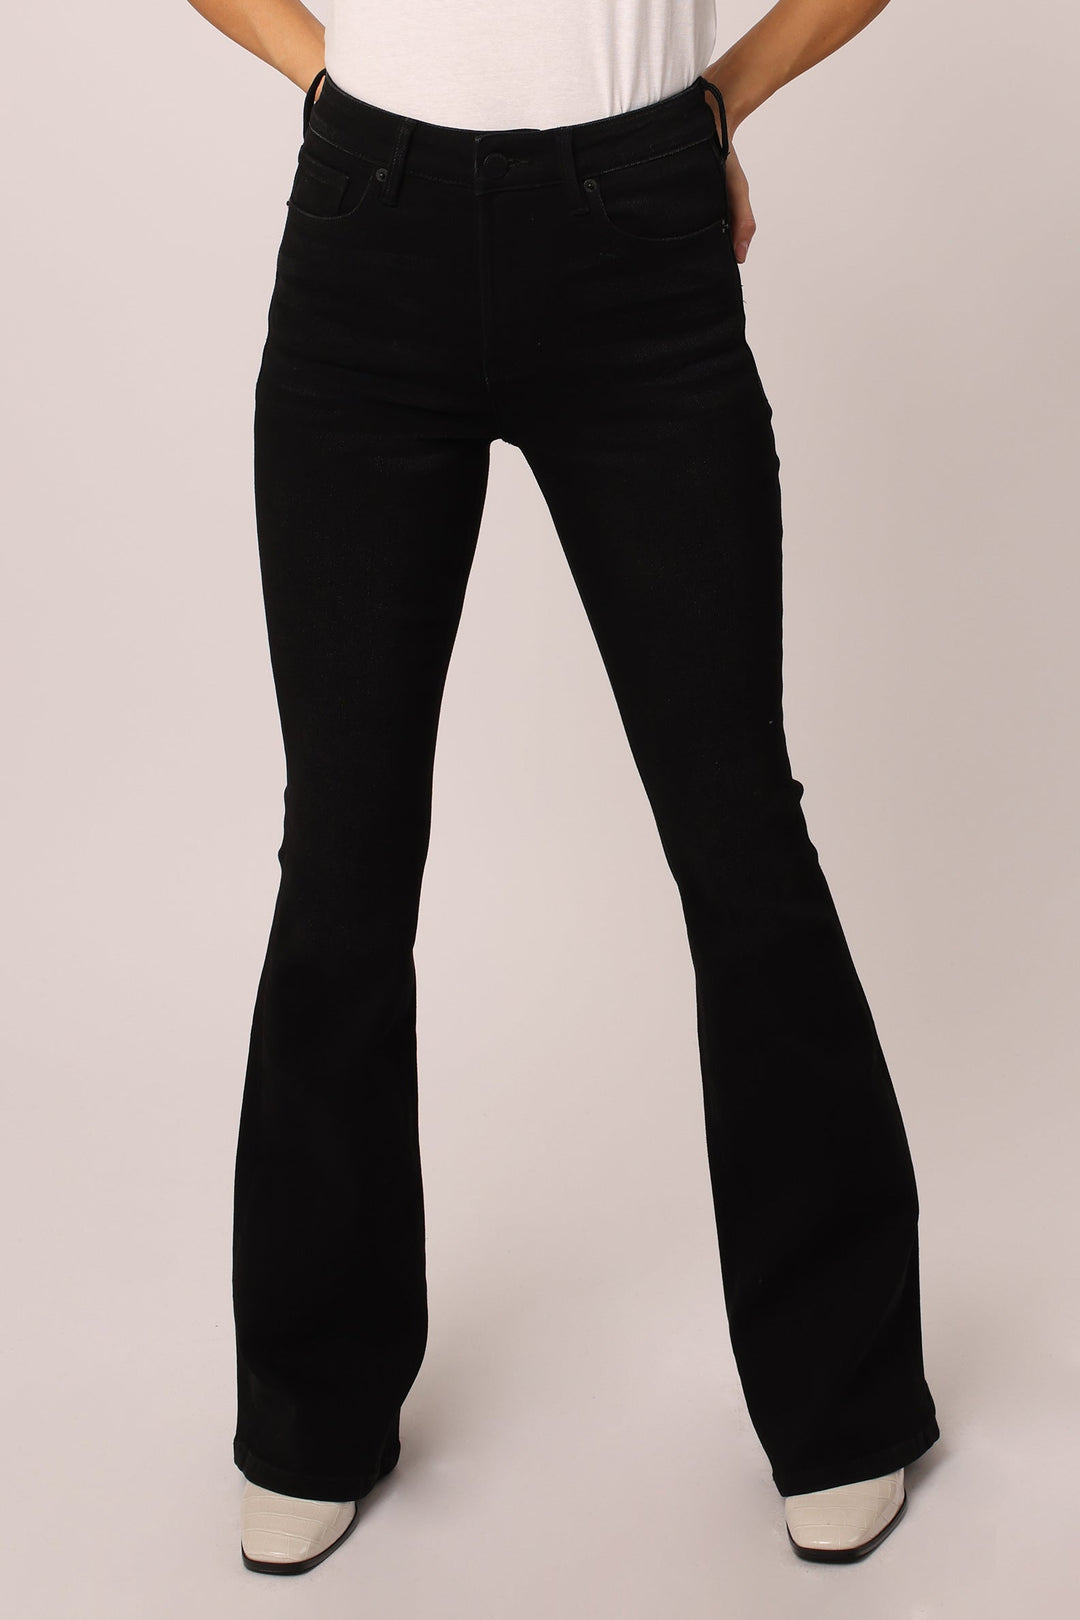 image of a female model wearing a LANEY HIGH RISE FLARE LEG JEANS BLACKWELL JEANS